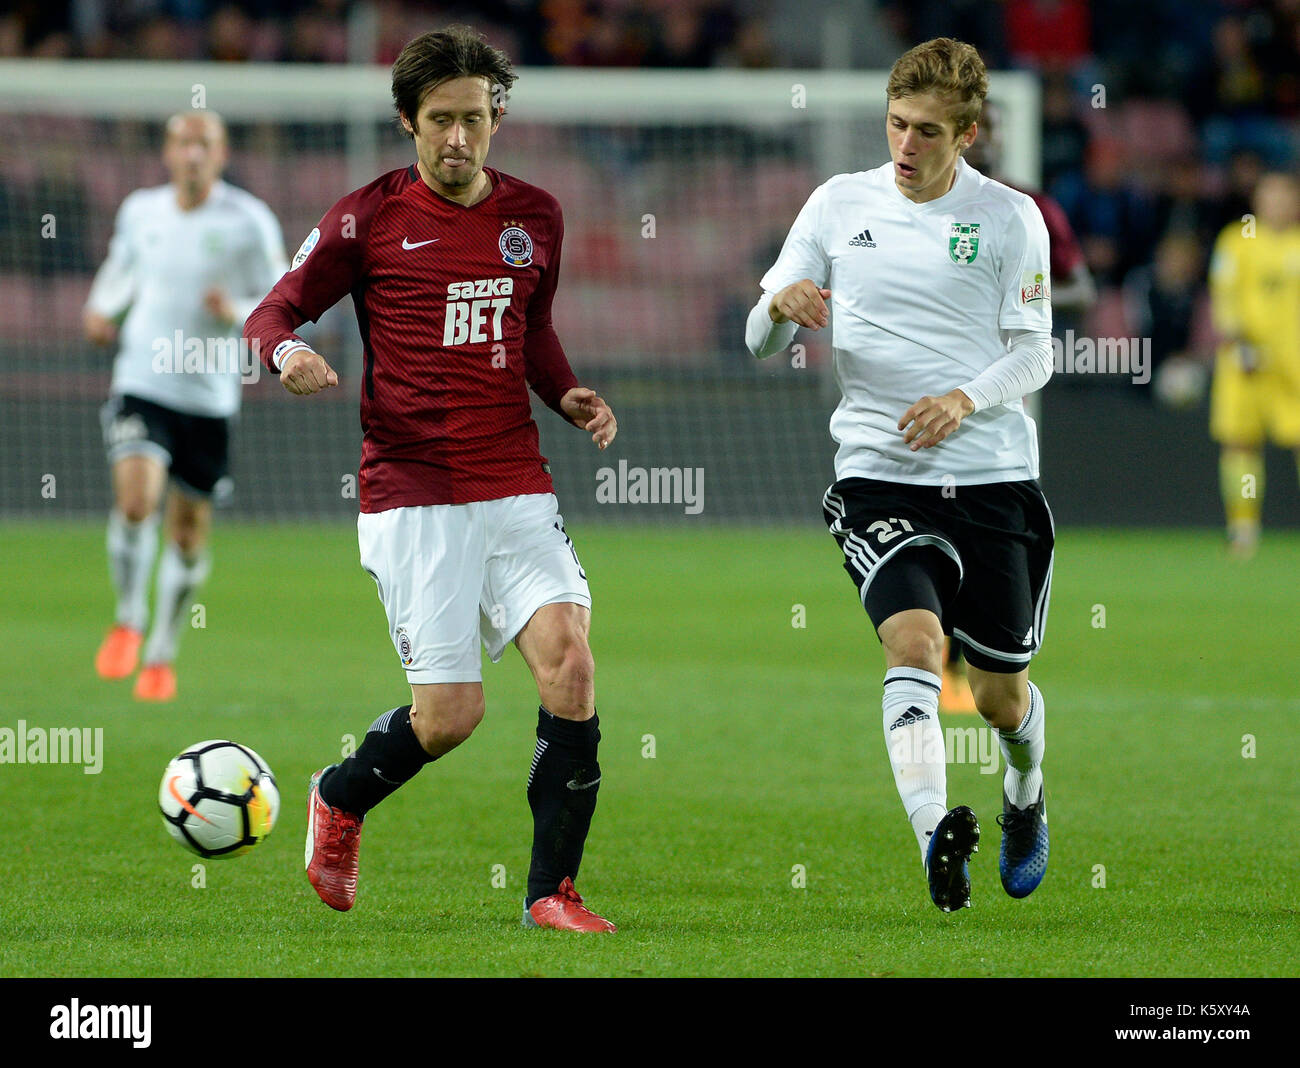 Prague, Czech Republic. 10th Sep, 2017. Tomas Rosicky of Sparta, left, and  Tomas Weber of Karvina in action during the 6th round match of Czech soccer  league Sparta Praha vs Karvina in